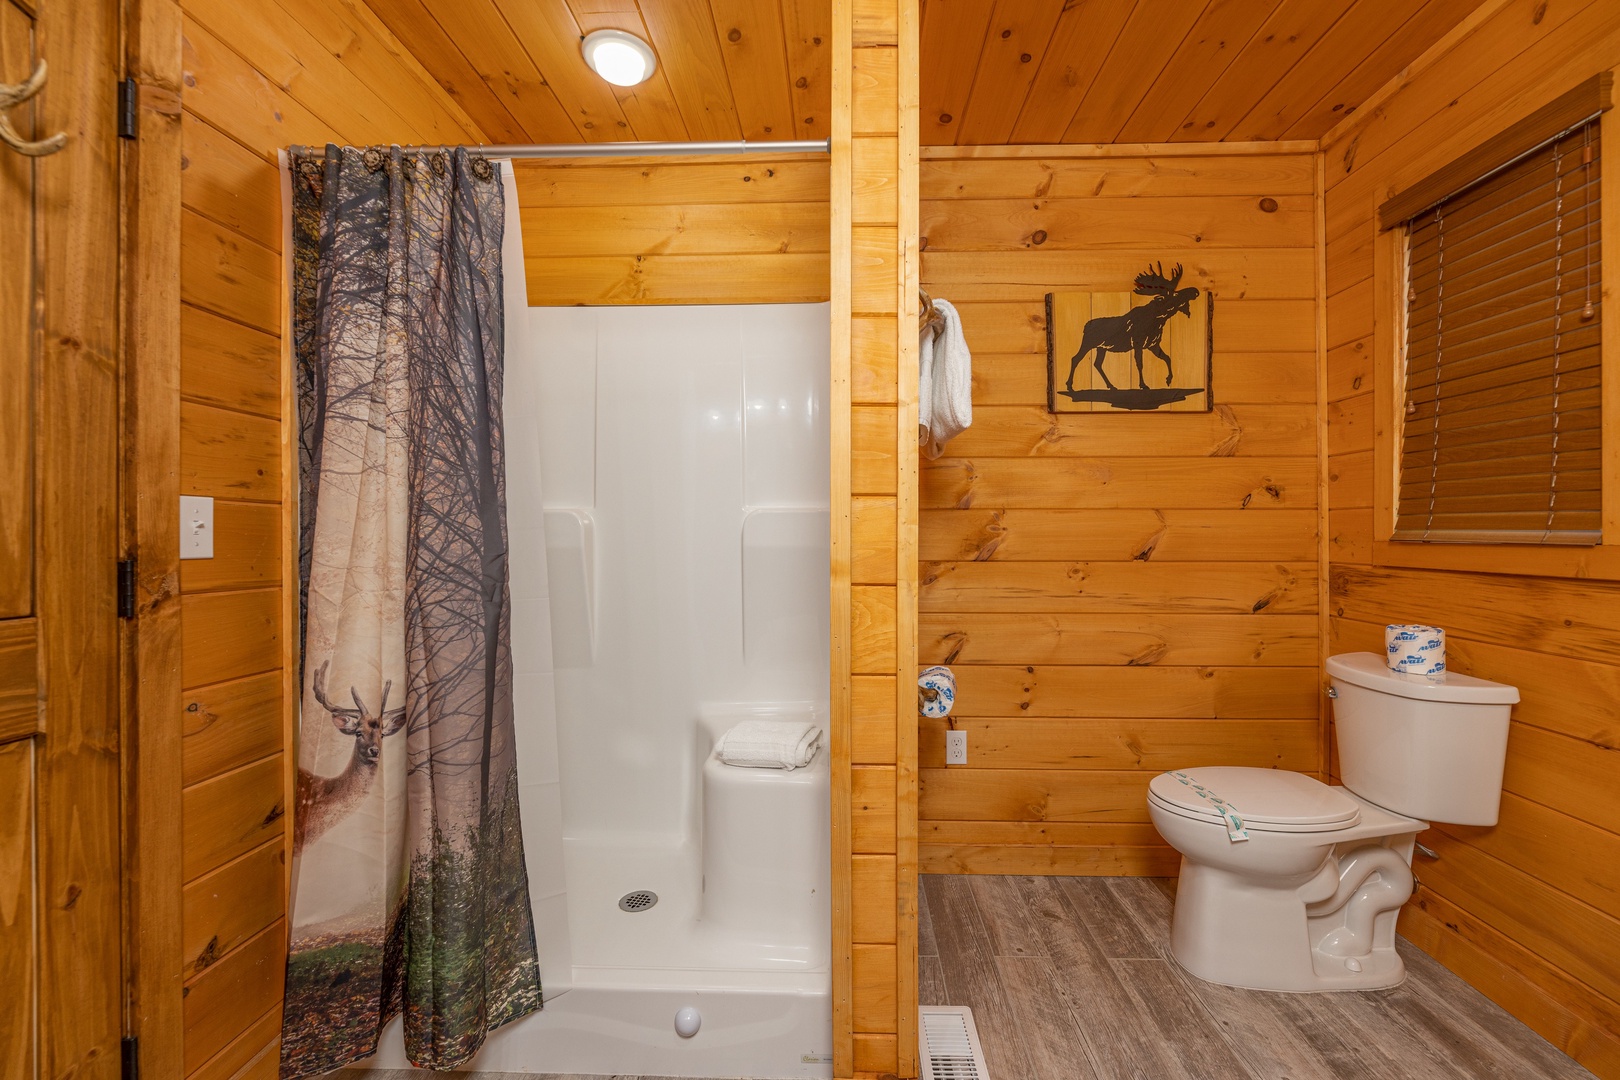 Walk in shower in a bathroom at J's Hideaway, a 4 bedroom cabin rental located in Pigeon Forge